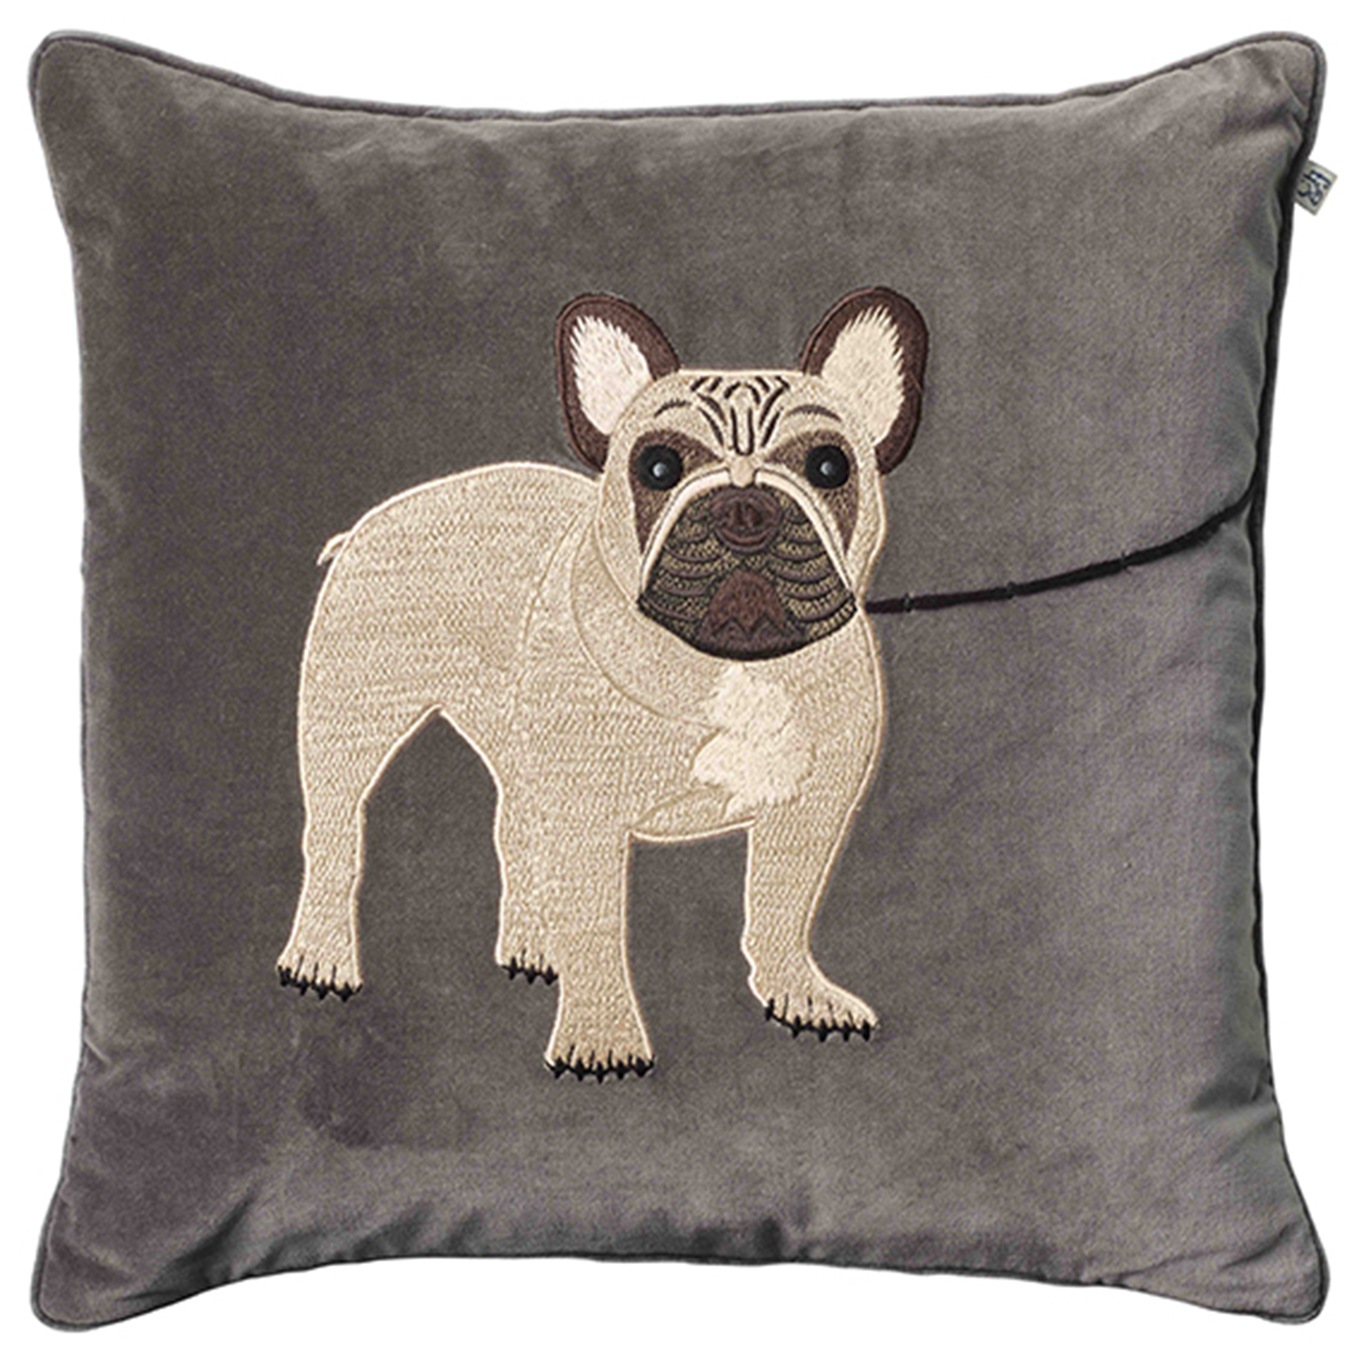 Embroidered French Bull Dog Kuddfodral 50x50 cm, Grey